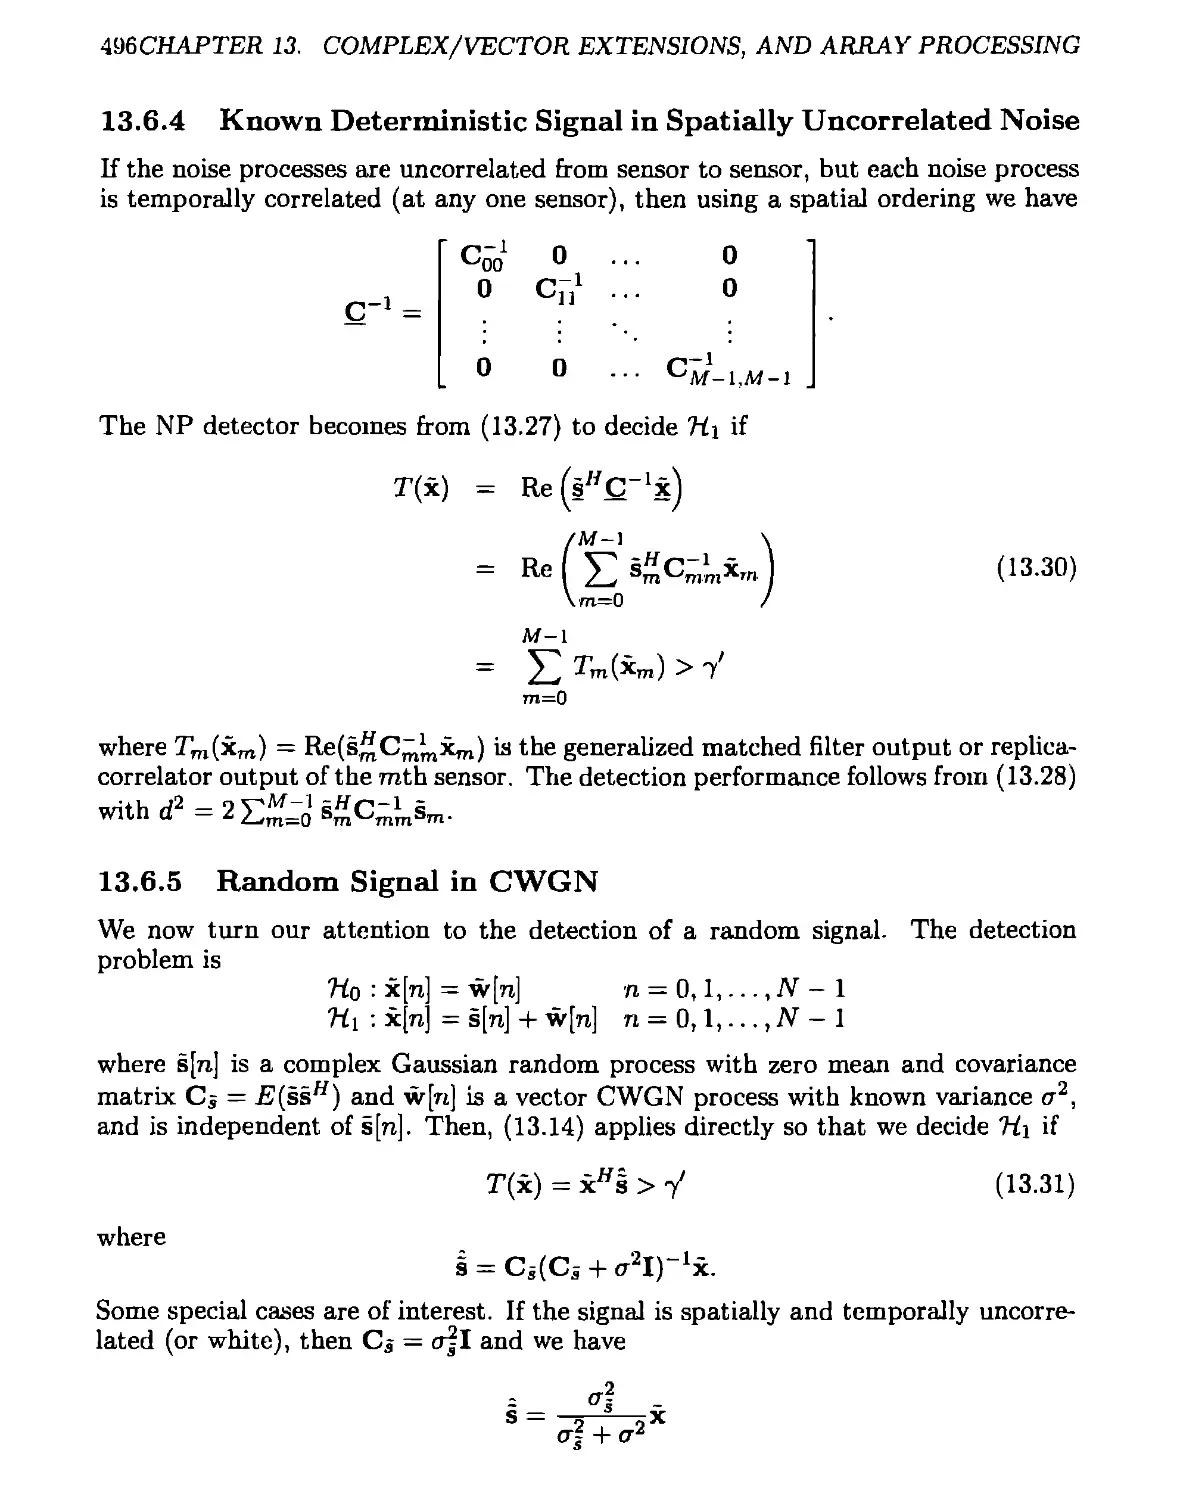 13.6.4 Known Deterministic Signal in Spatially Uncorrelated Noise
13.6.5 Random Signal in CWGN